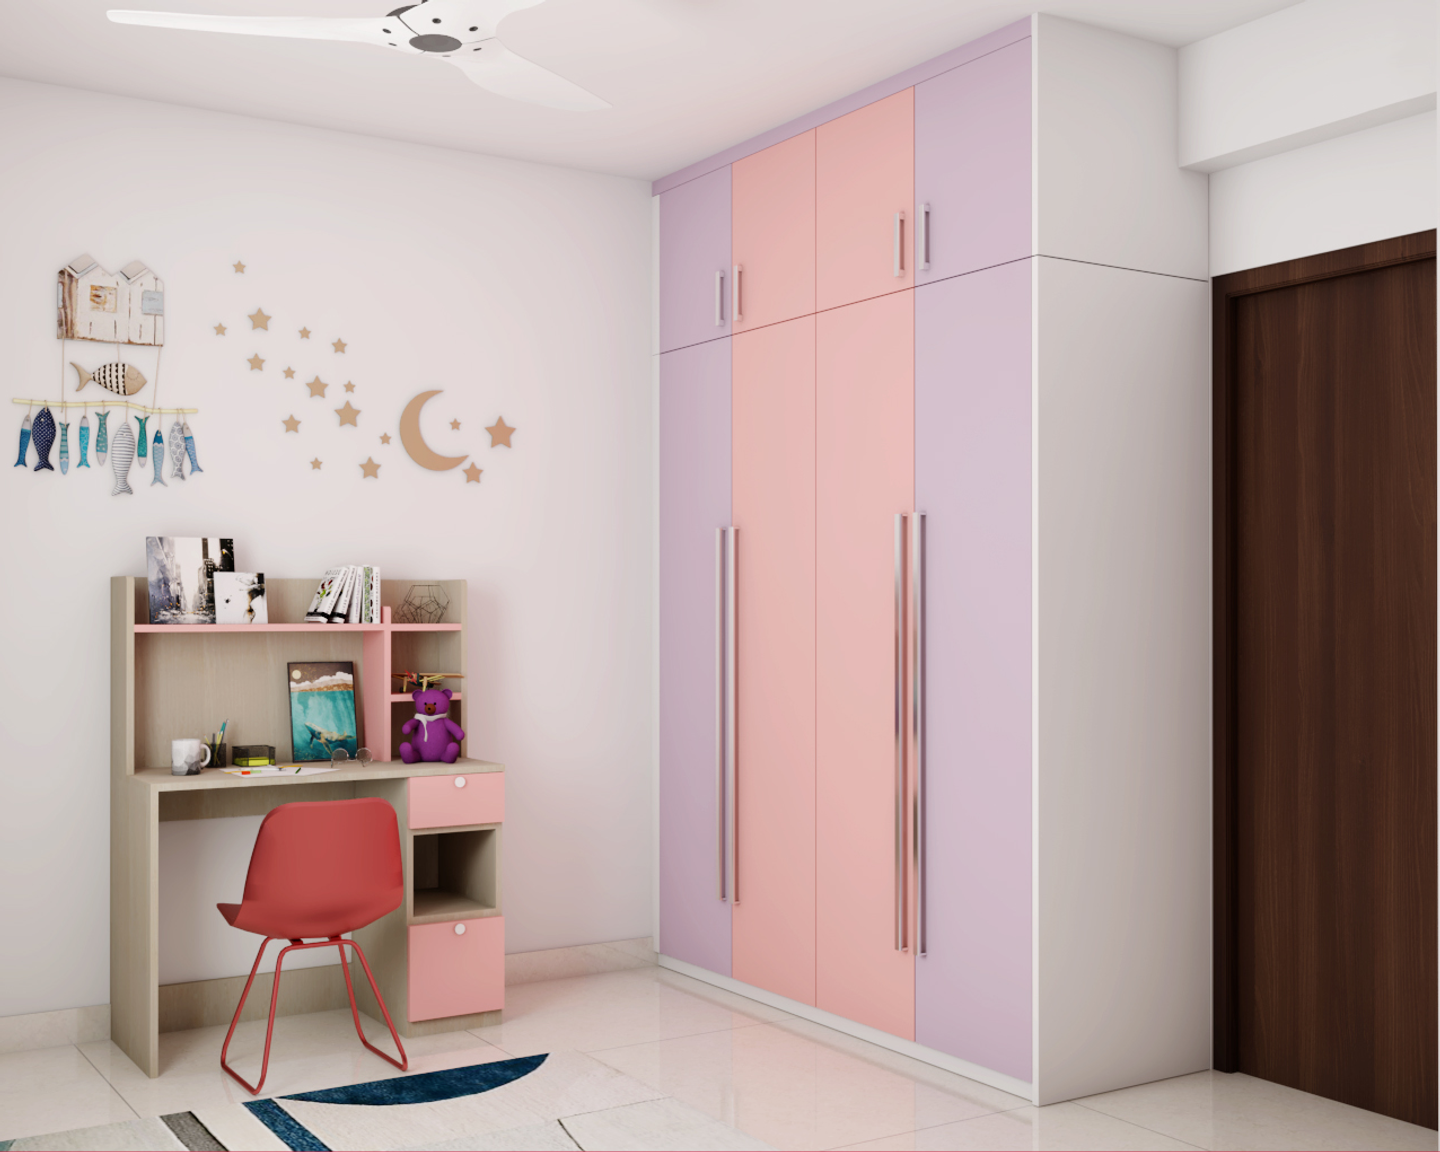 Modern Spacious Kid's Bedroom Design With Wardrobe And Loft